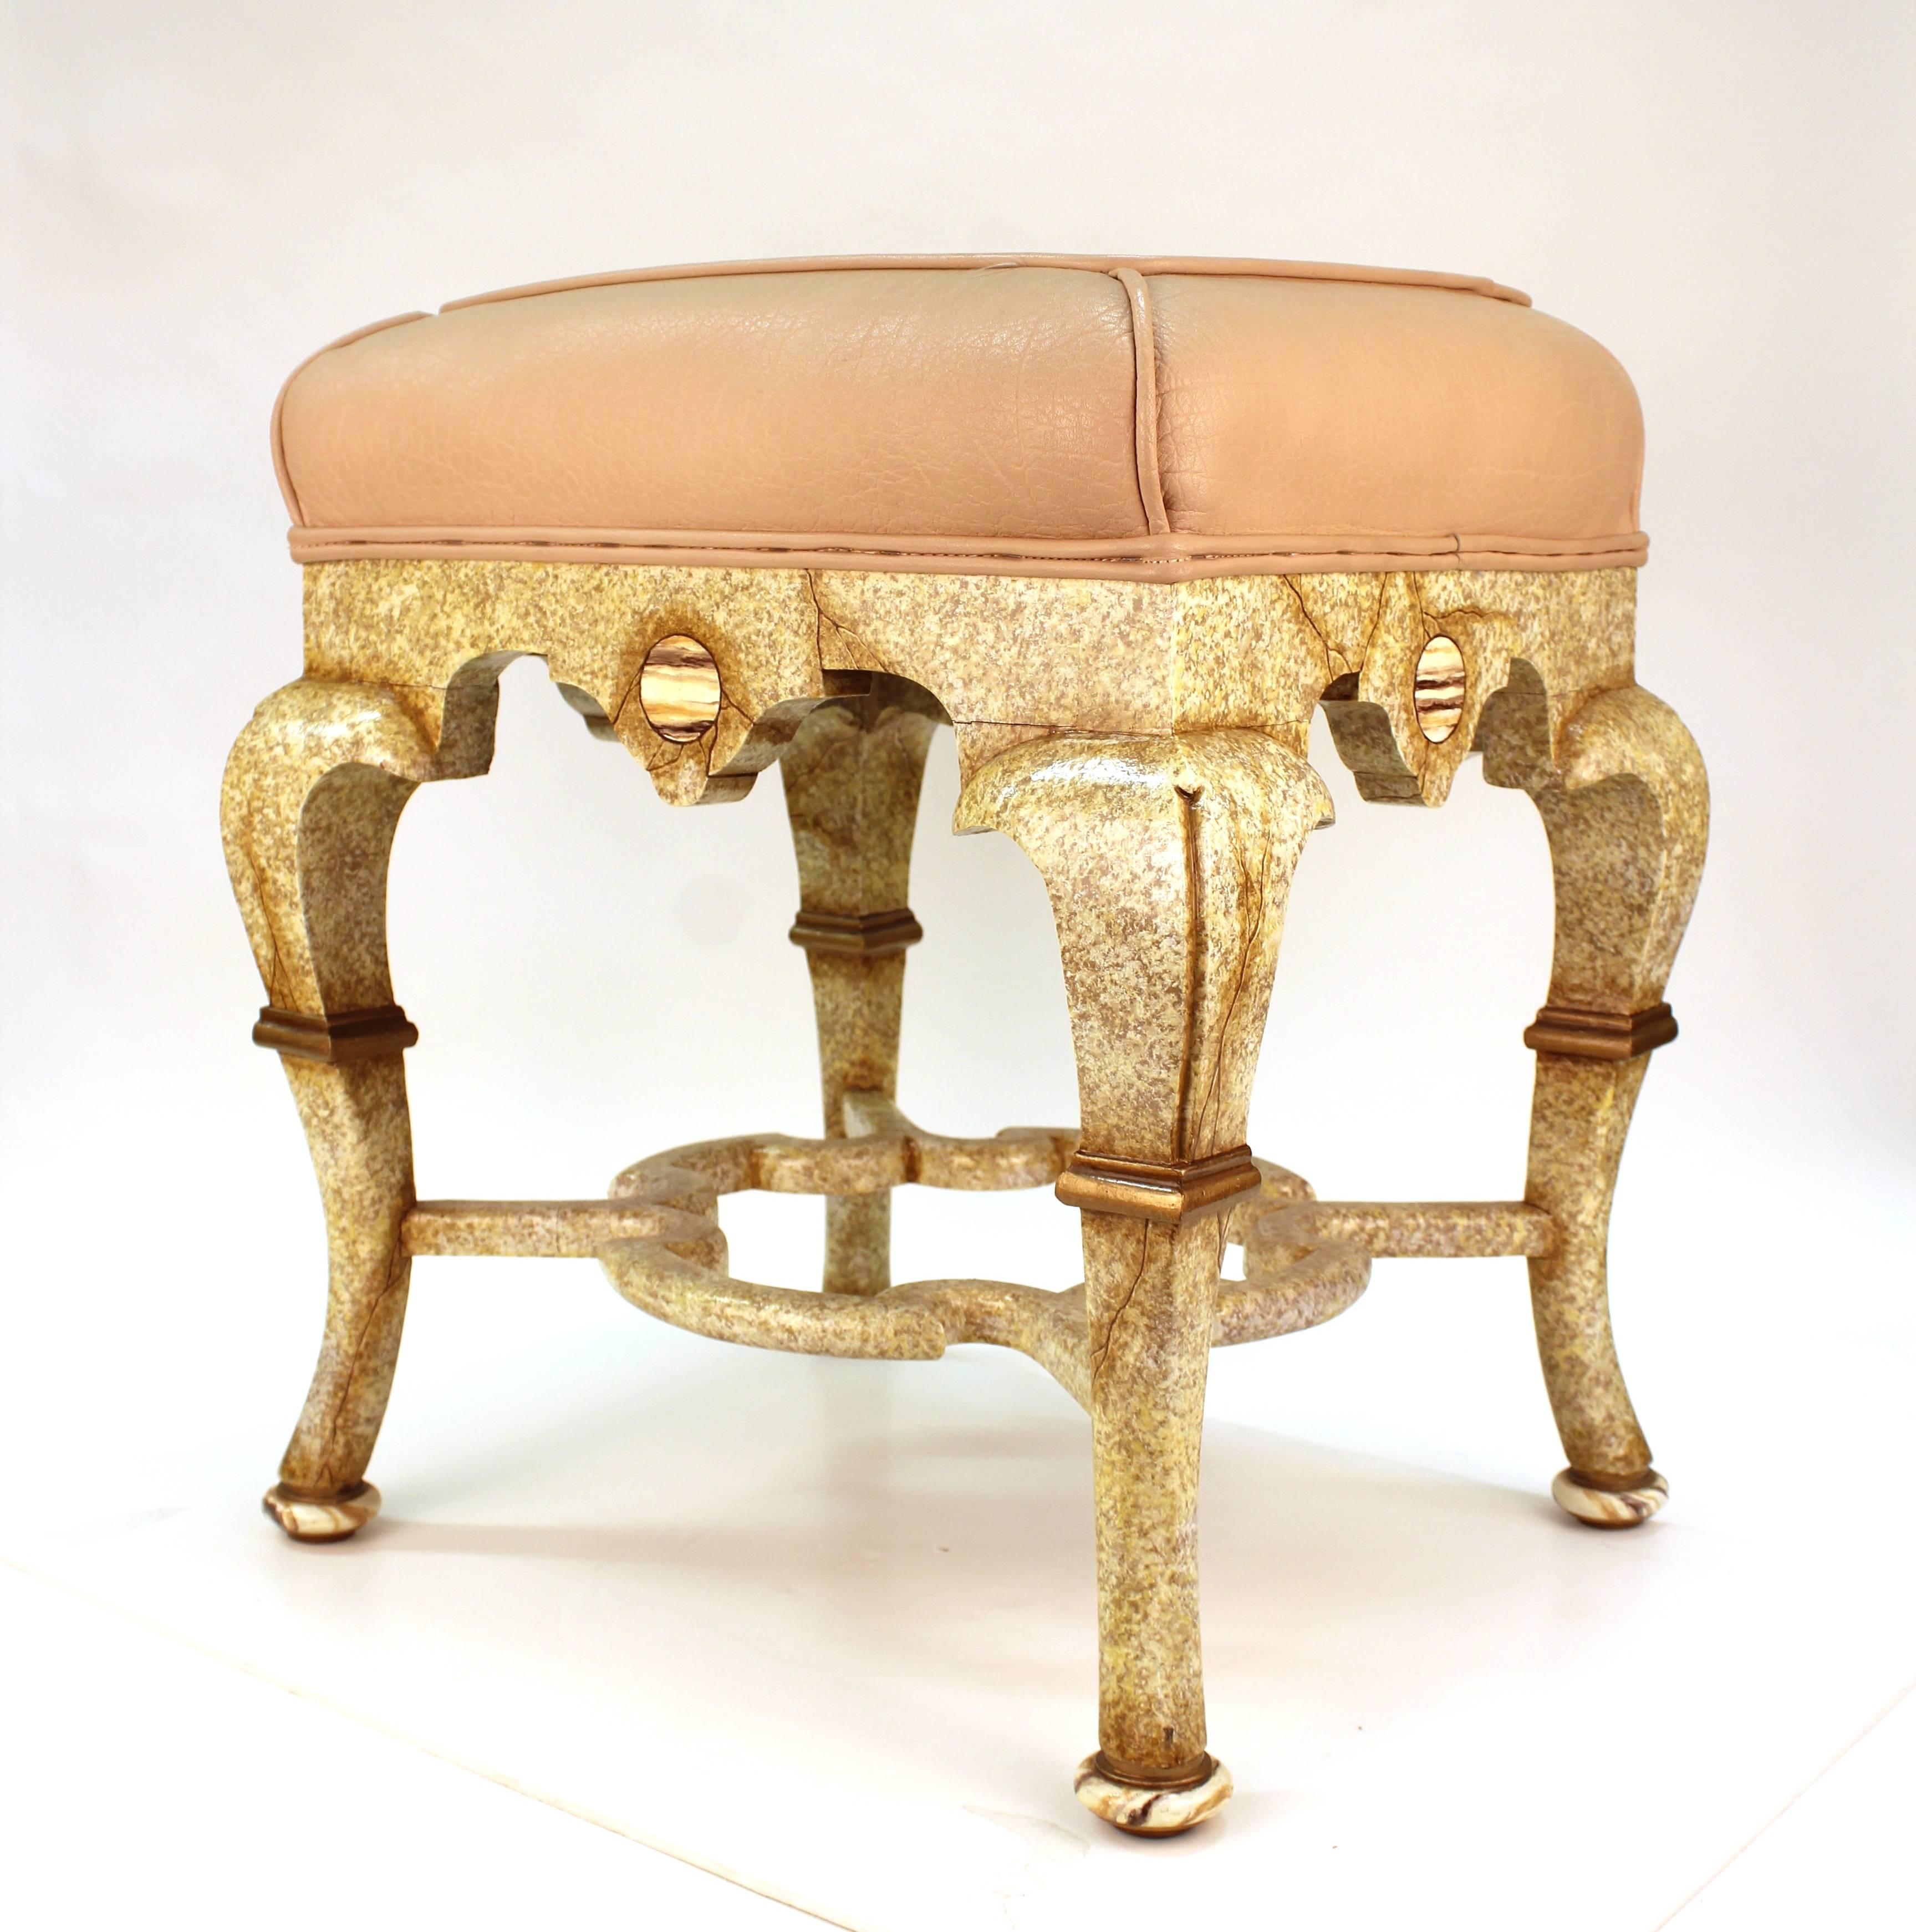 Late 20th Century Hollywood Regency Stools Painted in Trompe-l'Oeil Style